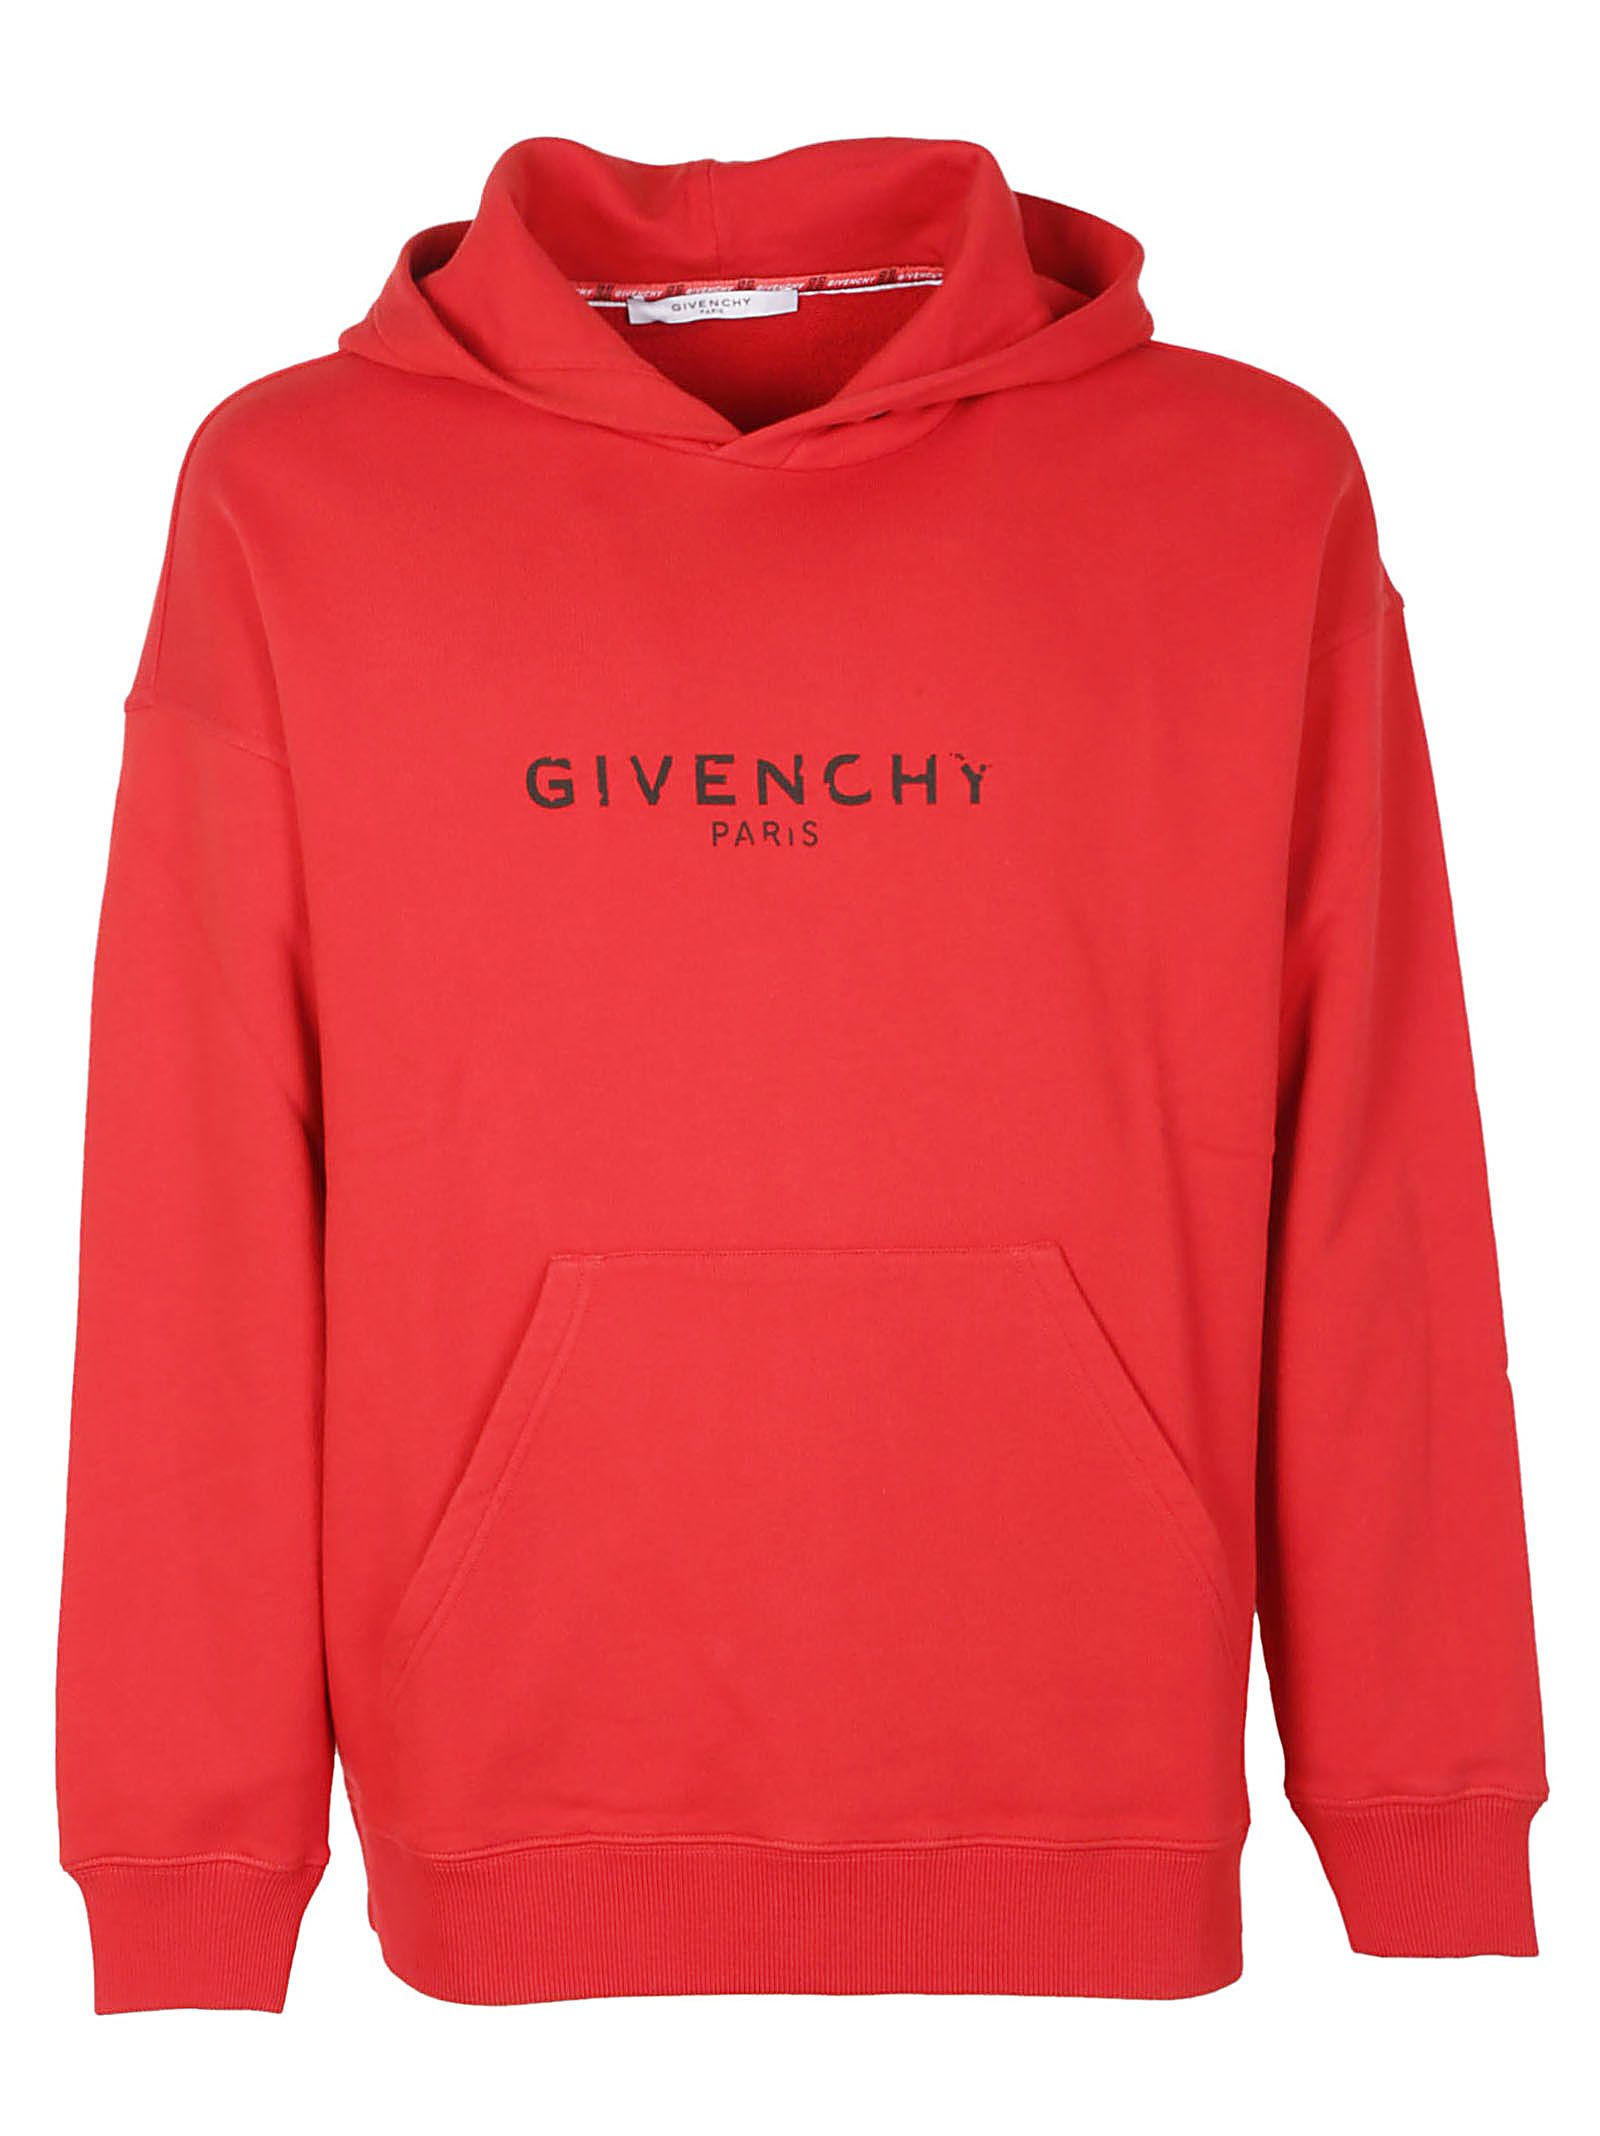 Givenchy Hoodie In Bright Red | ModeSens